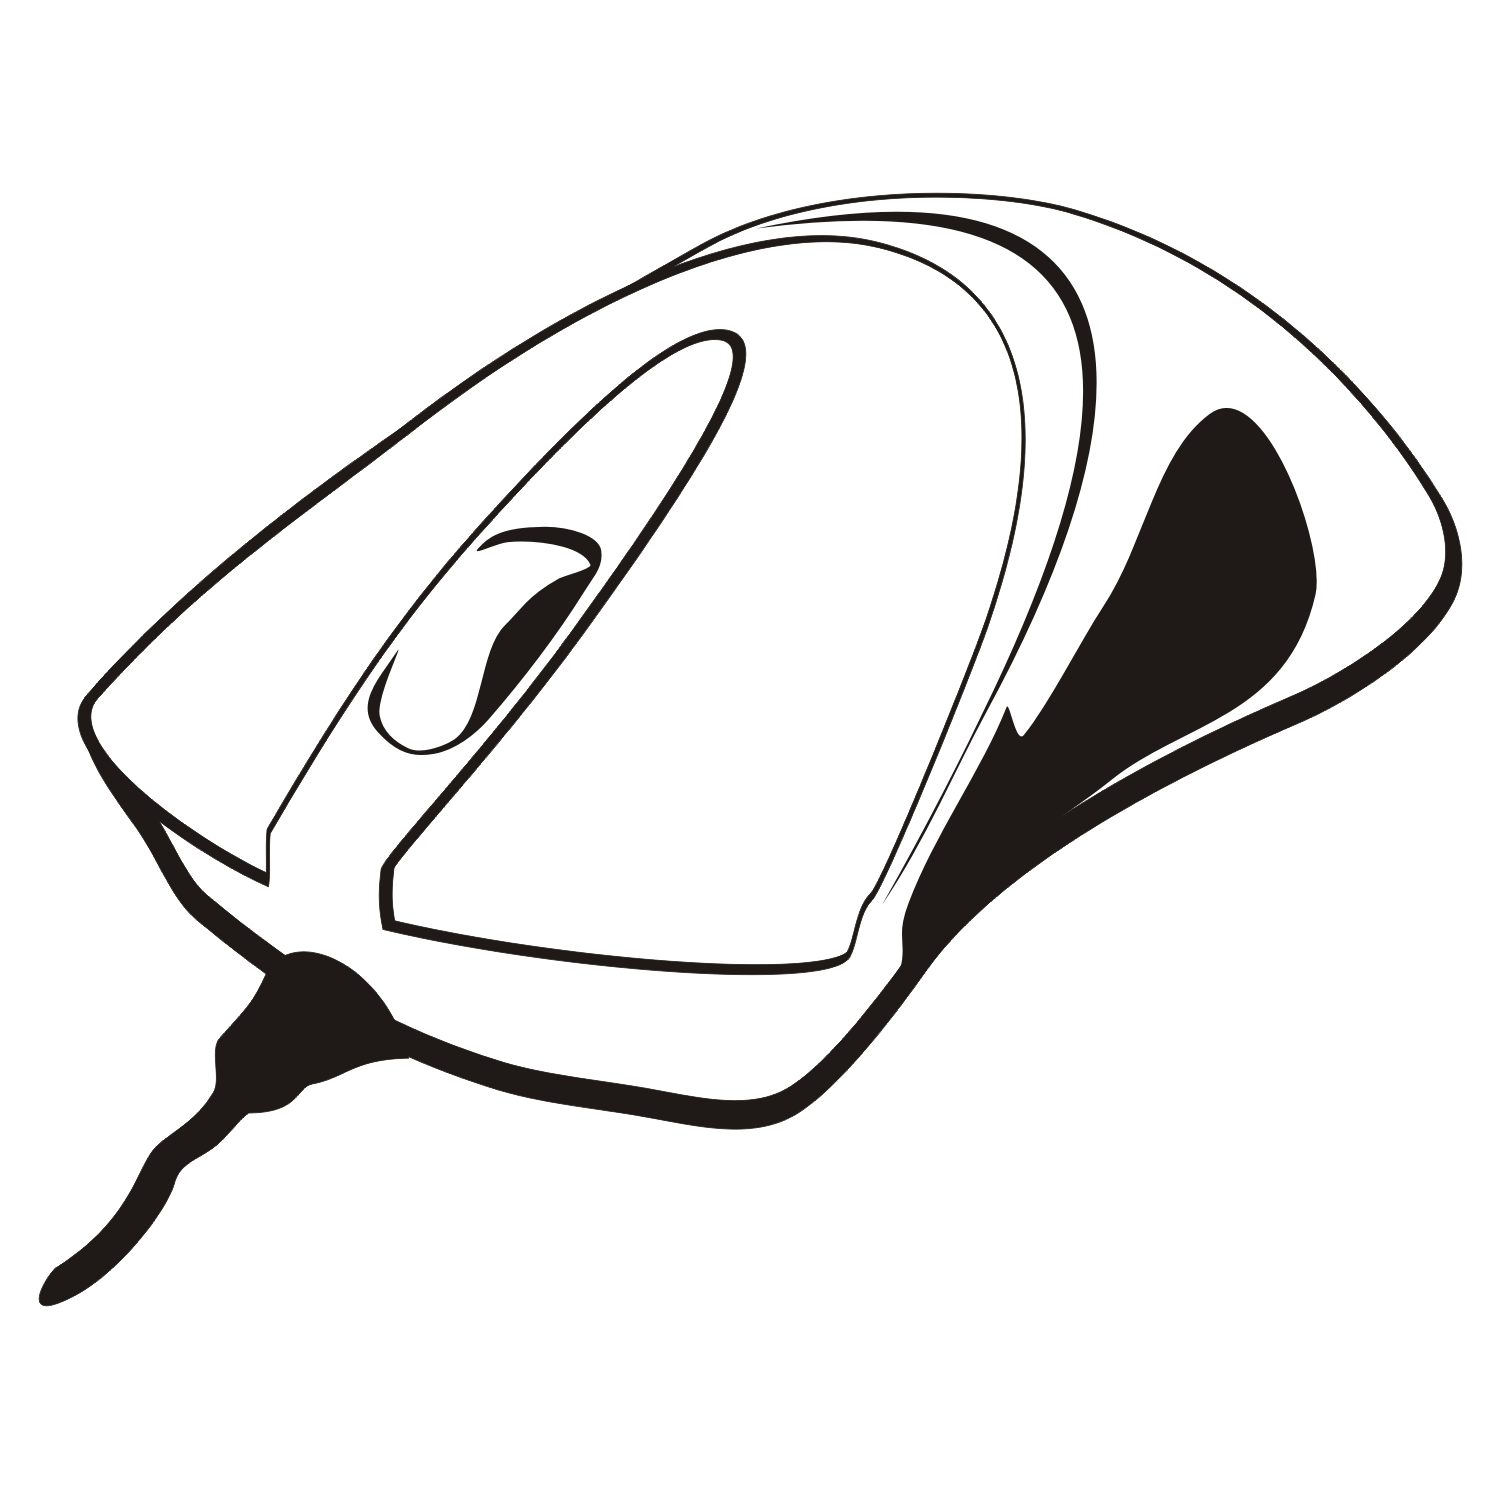 computer mouse clipart black and white - photo #13